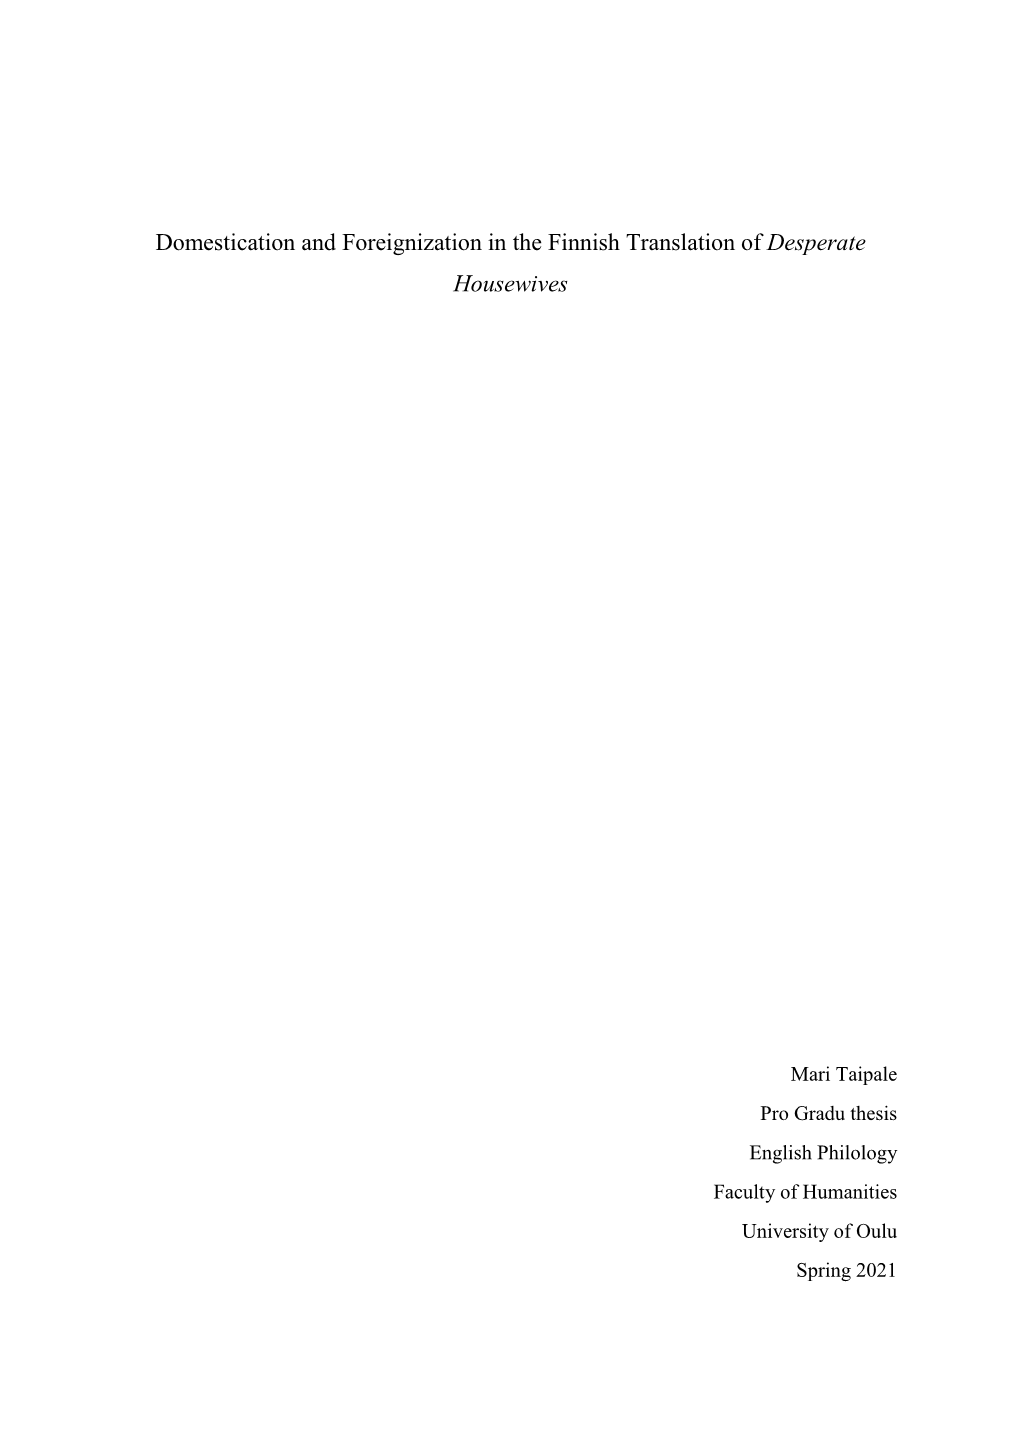 Domestication and Foreignization in the Finnish Translation of Desperate Housewives